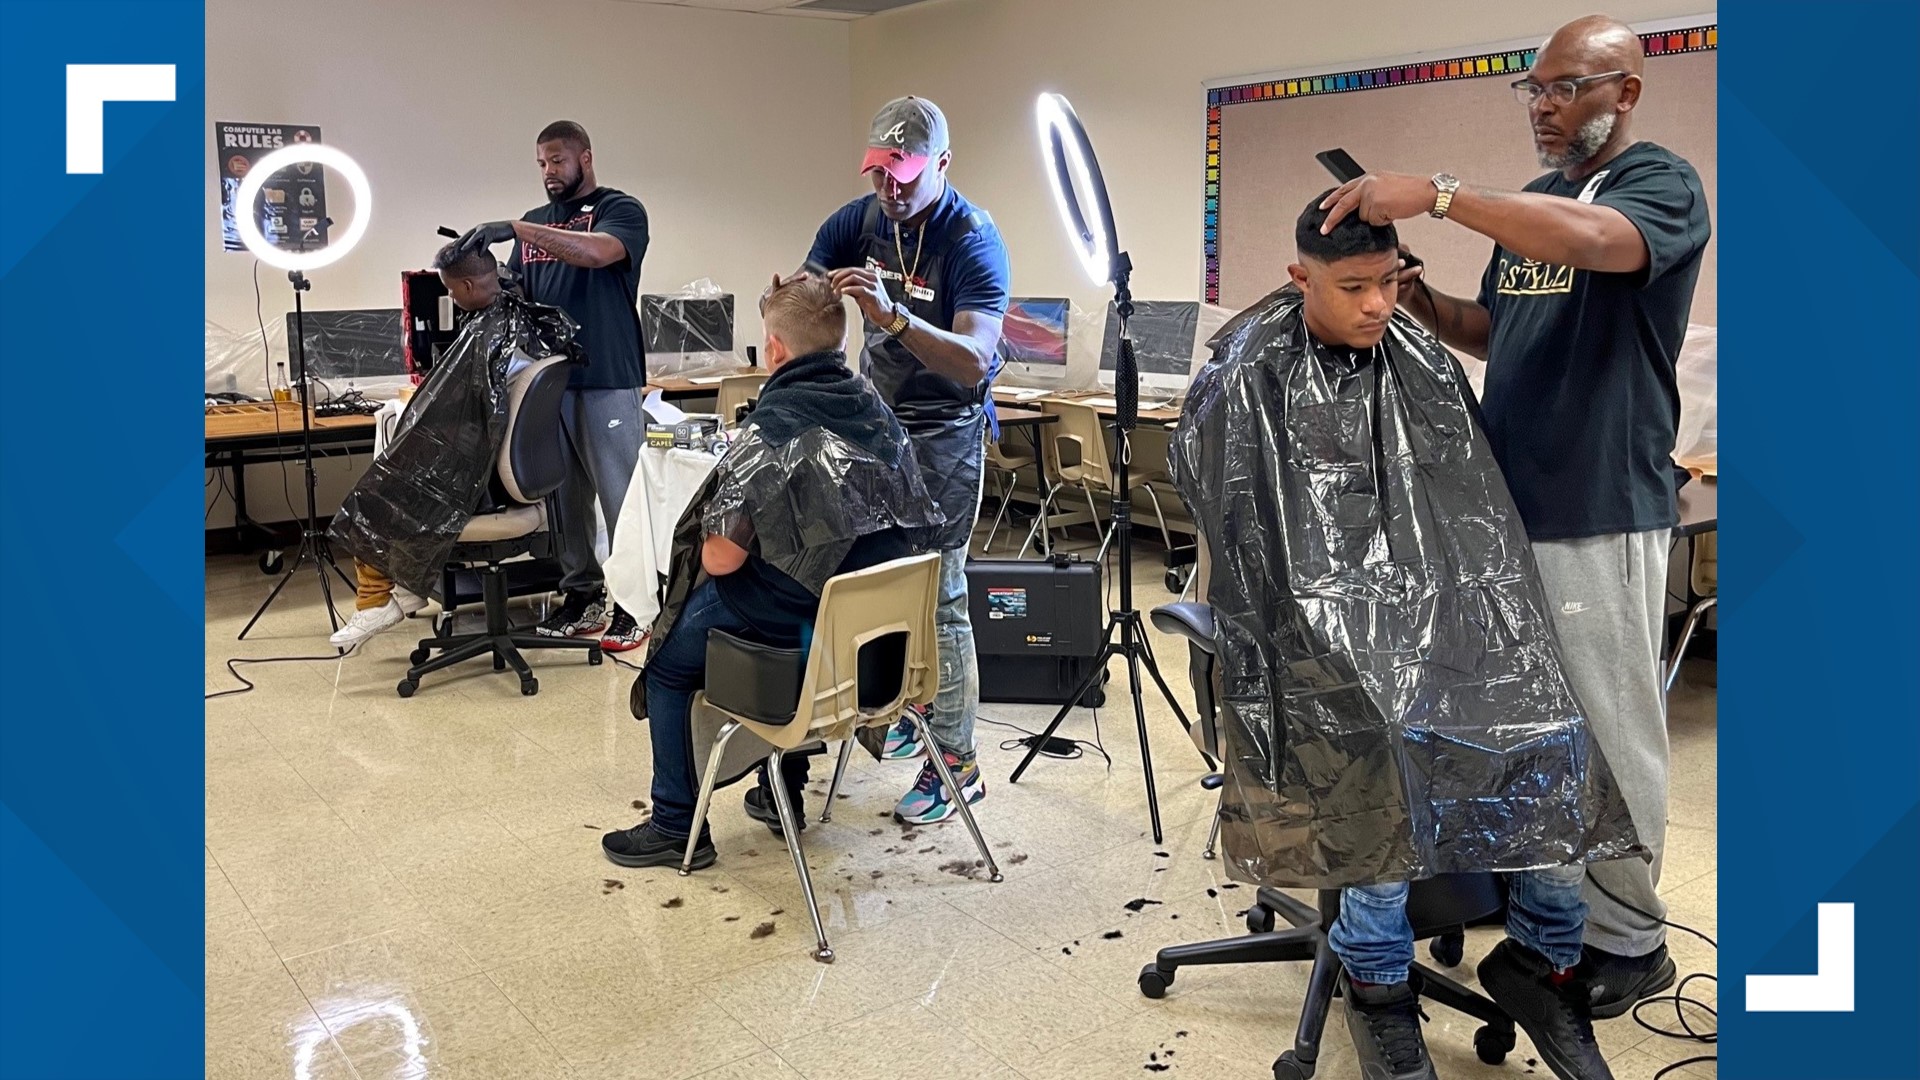 When you look good, you feel good and one local barber is giving back to local young men with a haircut before the Thanksgiving holiday.